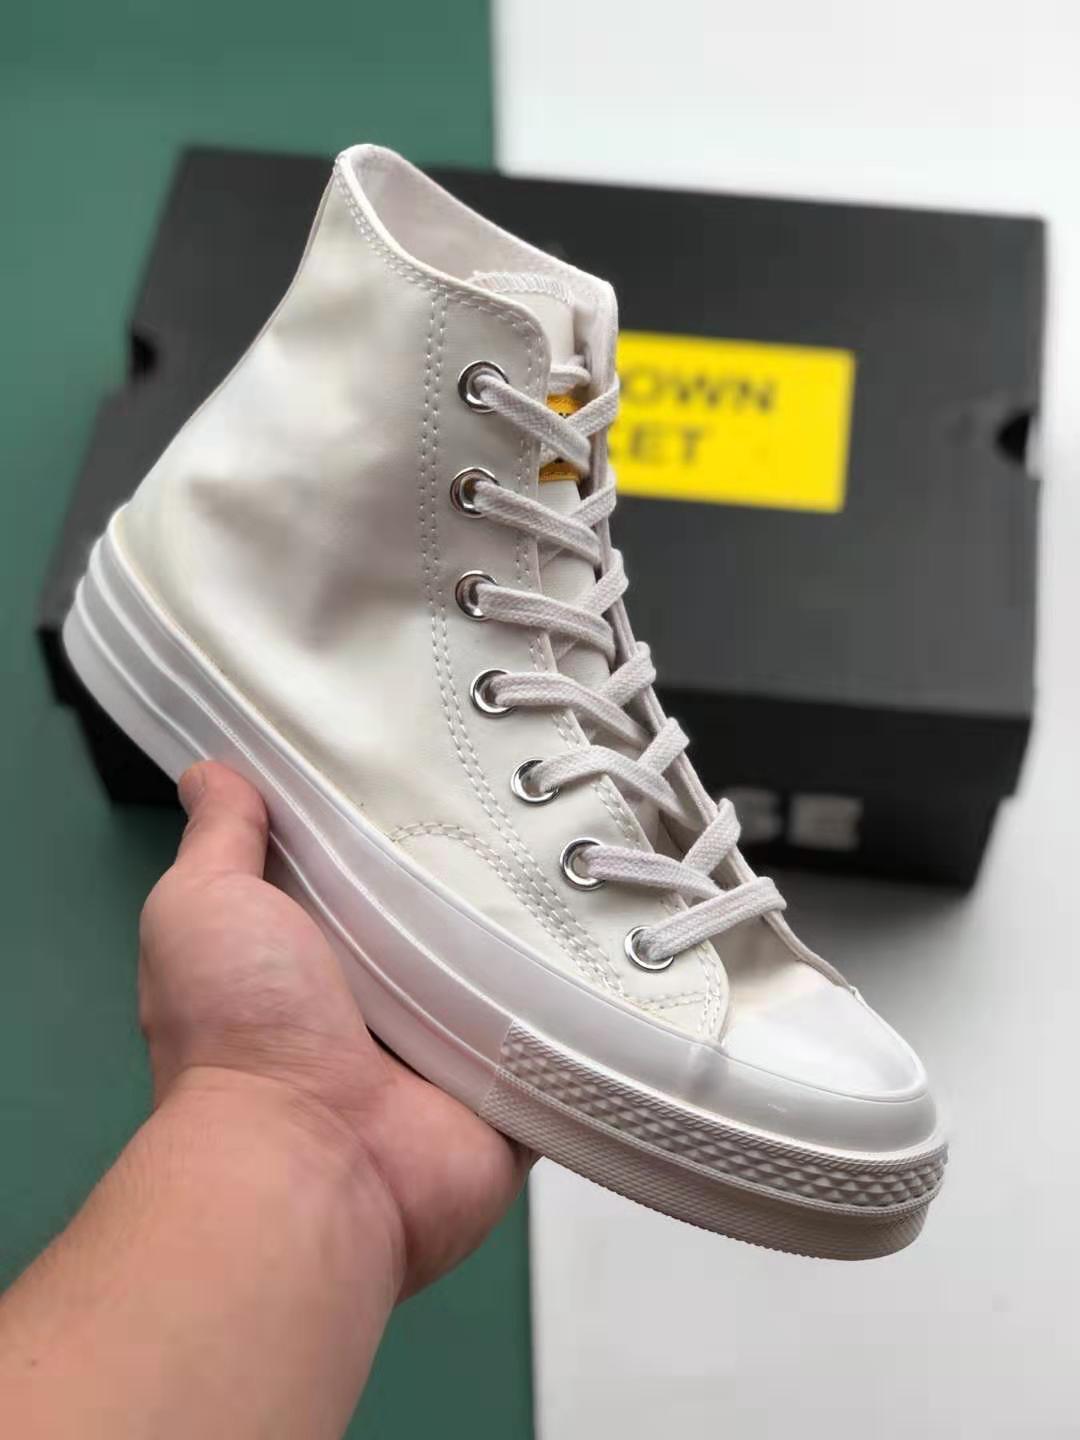 Classic Style and Comfort: Converse Chuck Taylor All Star Cali High Top 165689C